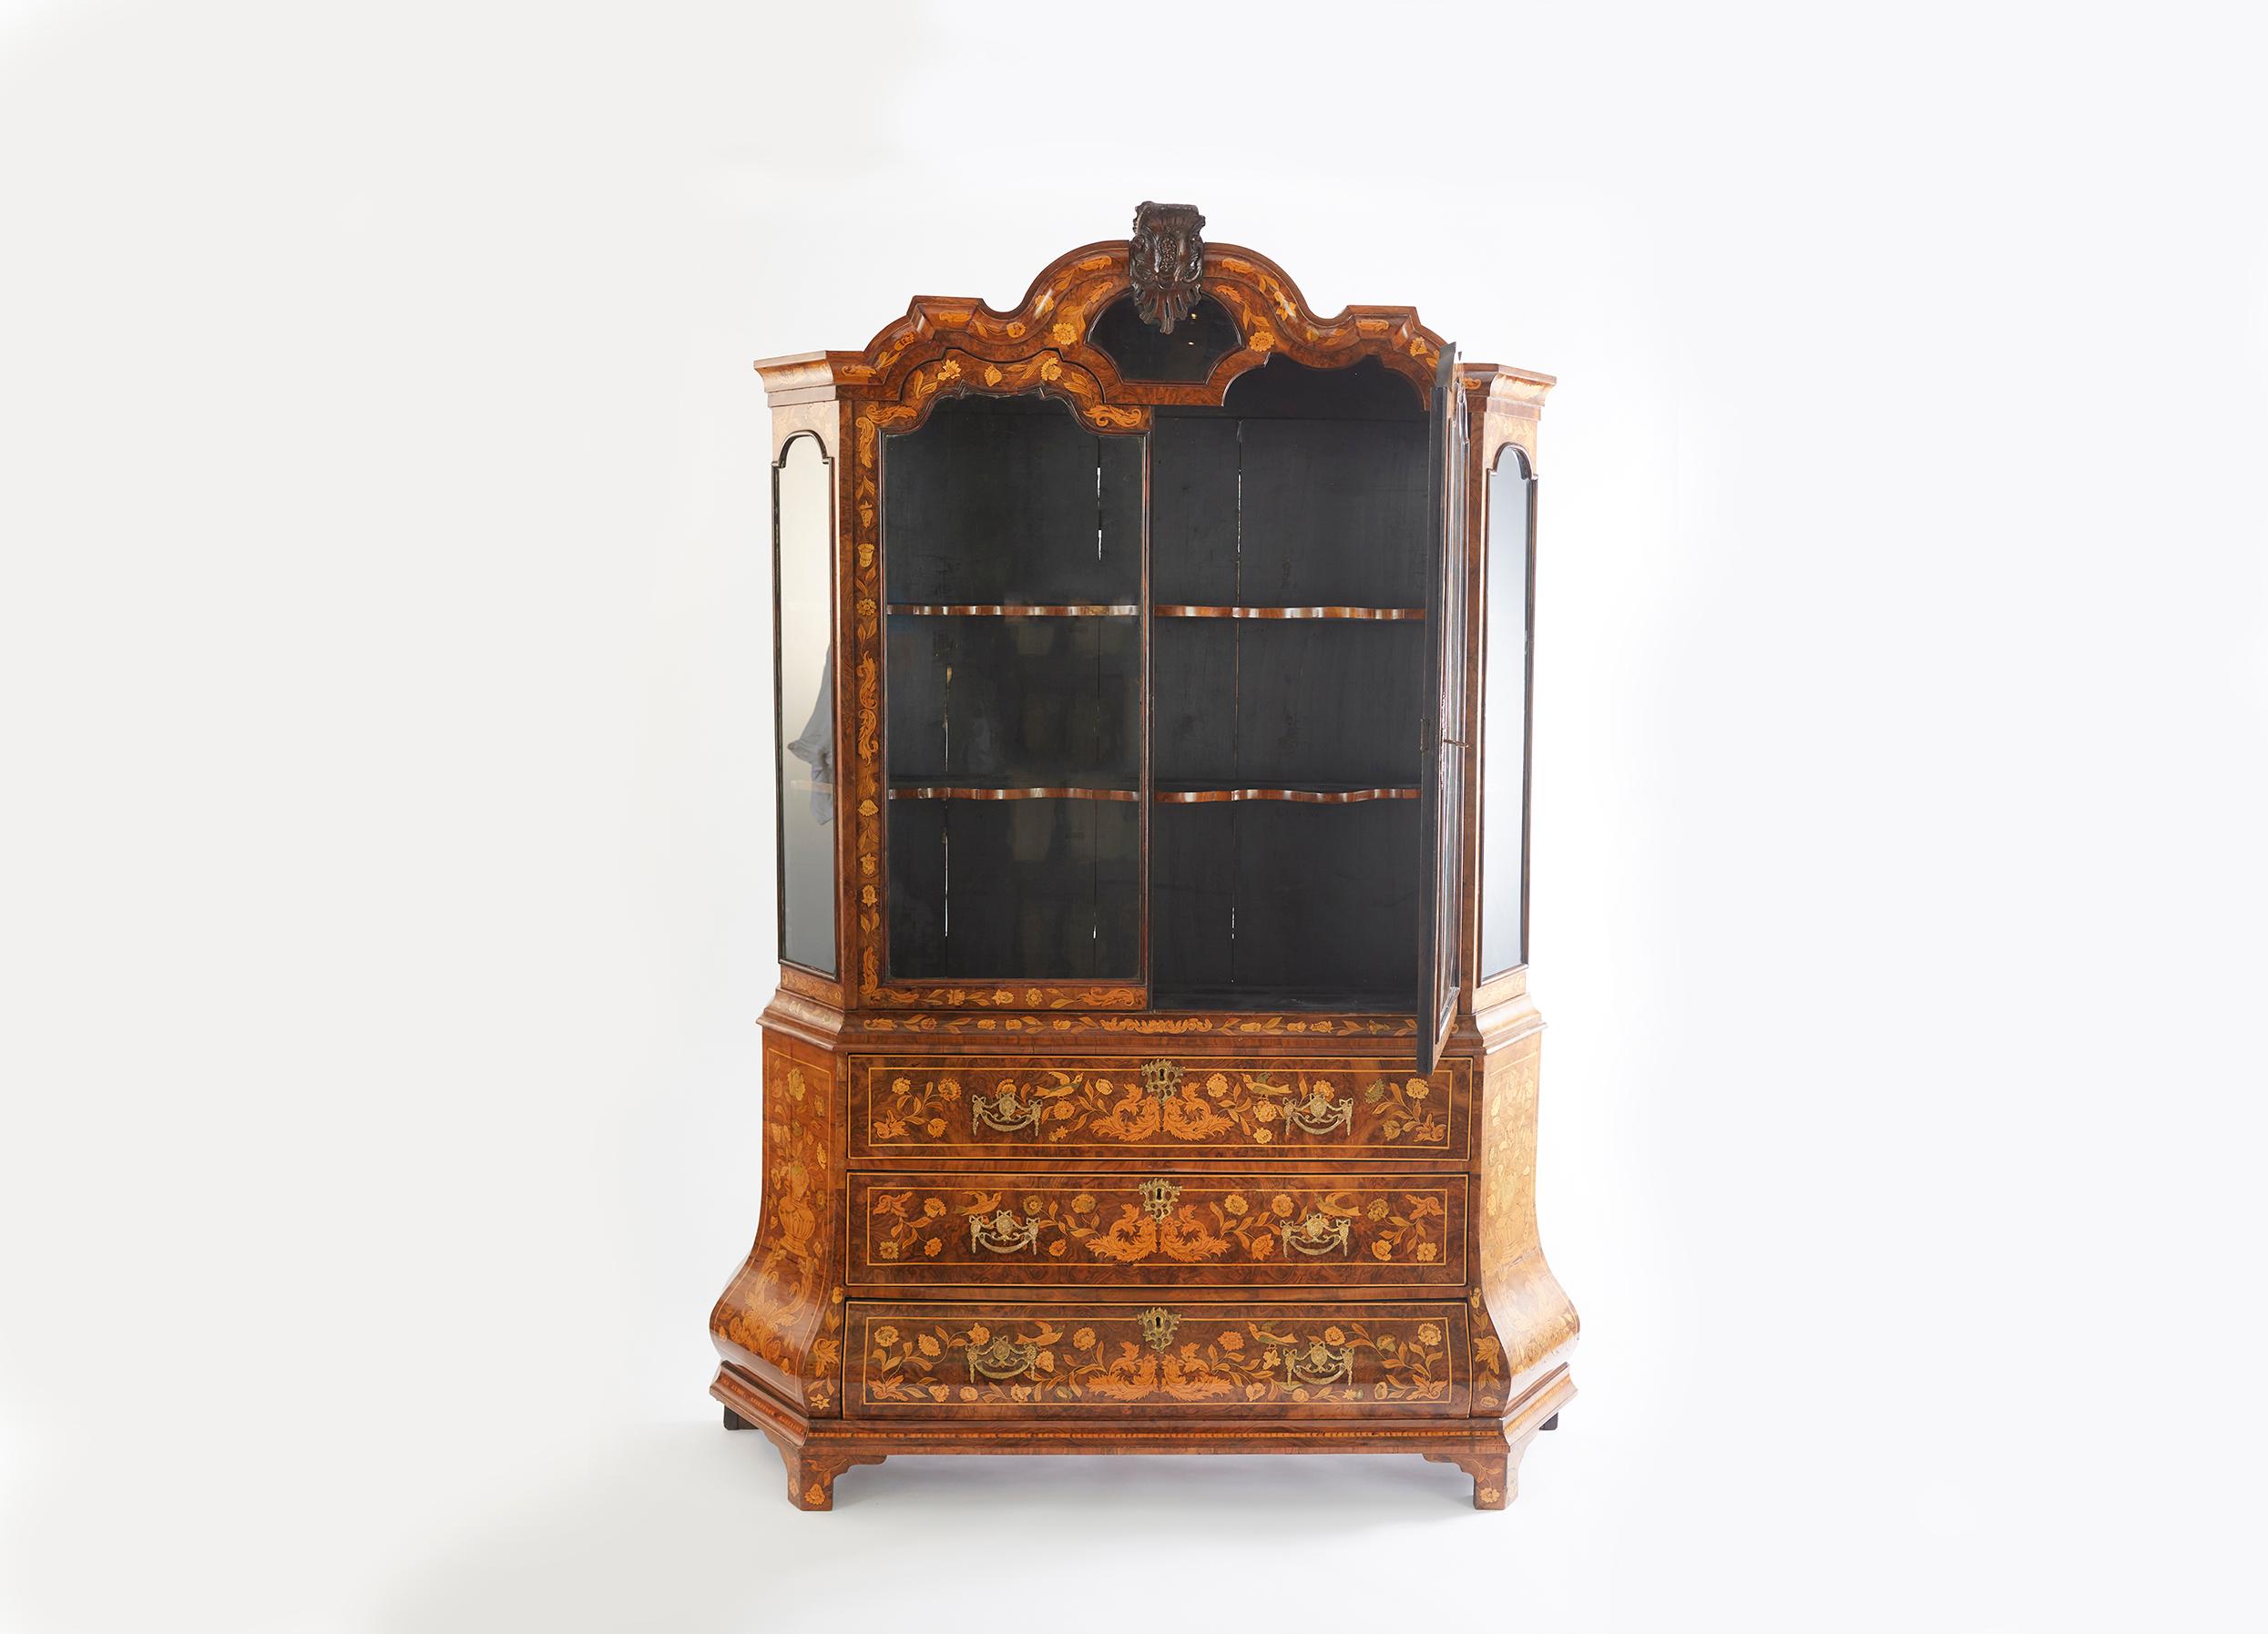 Very exquisite 19th century Dutch marquetry hand carved mahogany display cabinet. The cabinet is beautifully decorated with marquetry inlay including floral images, cherubs, birds and urns. The top section has 3 shelves for display and drawers down